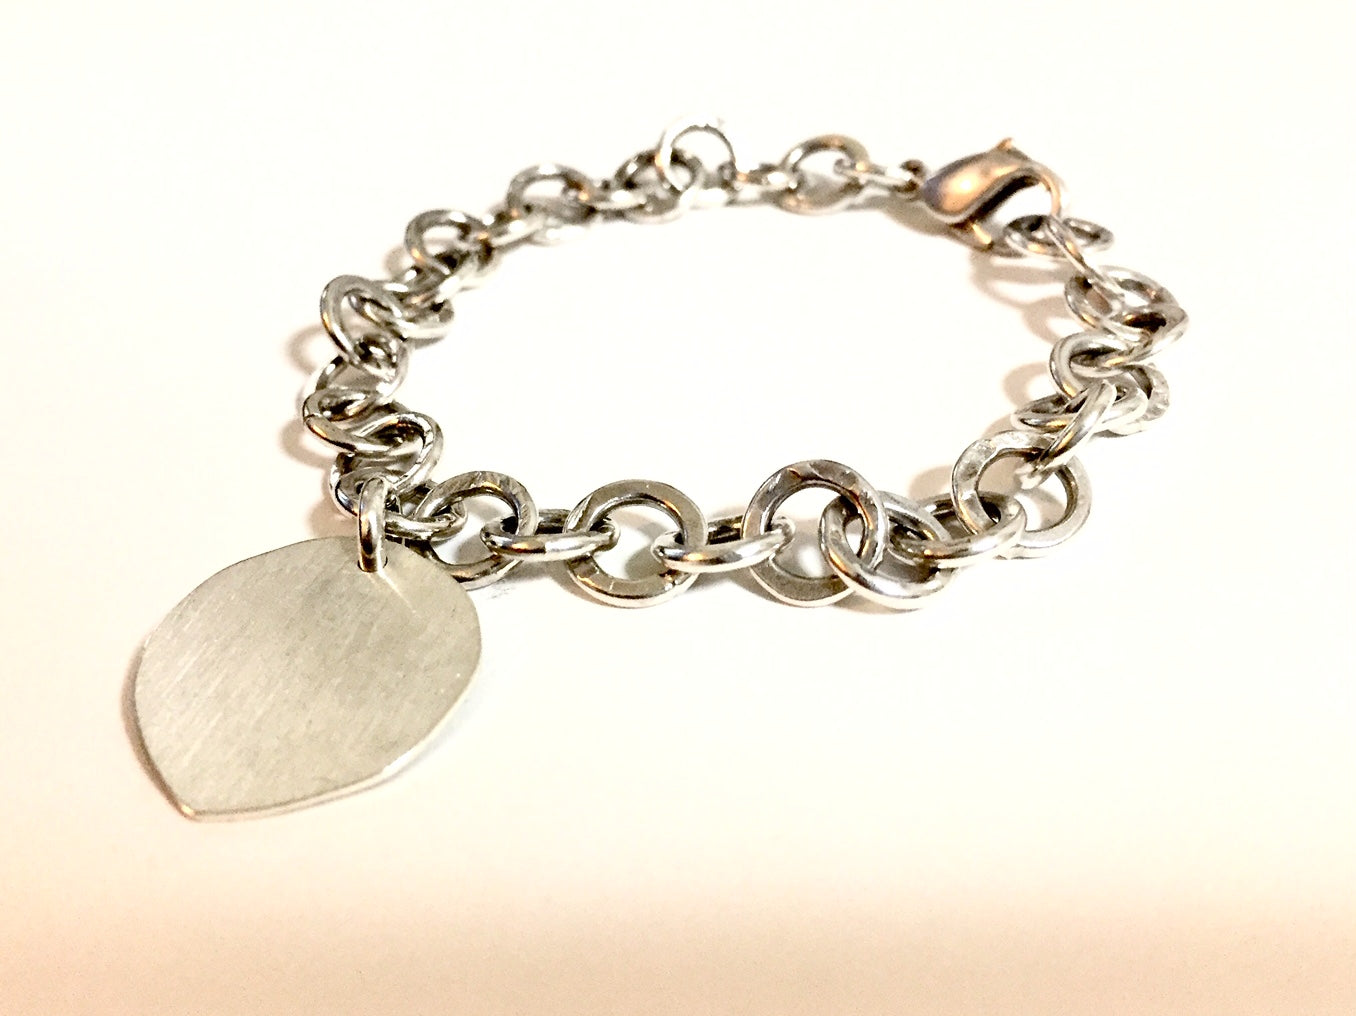 Silver925 Unique Coin/Round/Medallion Charm & Circle Link Chain Bracelet / Cuff For Men & Women ユニセックス・コインモチーフ・シルバーチェーンブレスレット・ハードウェア